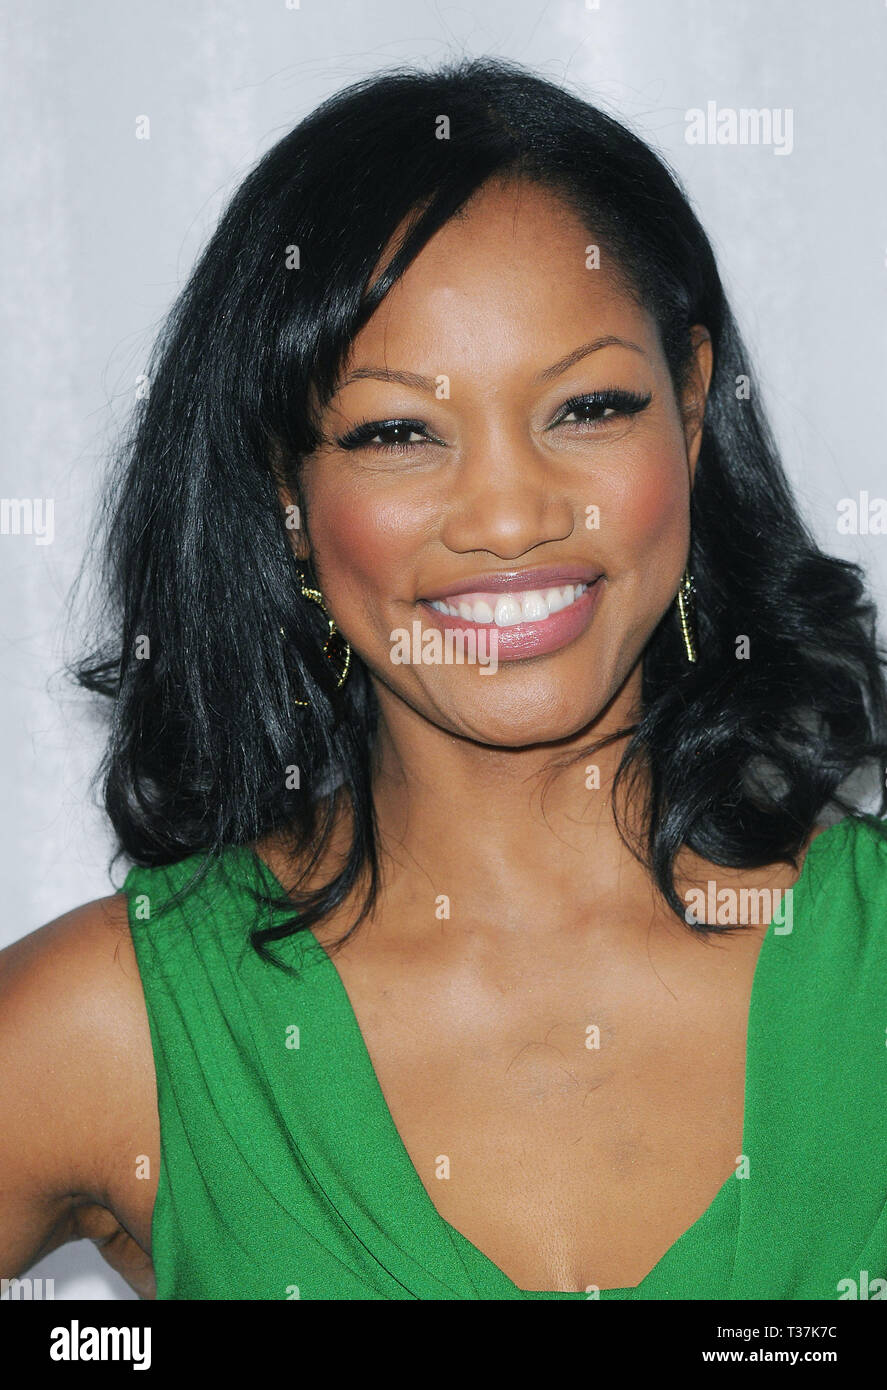 Garcelle Beauvais-Nilon  - A Diamond is For Ever Luncheon Party at the Beverly Hills Hotel In Los Angeles.Beauvais-NilonGarcelle 79 Red Carpet Event, Vertical, USA, Film Industry, Celebrities,  Photography, Bestof, Arts Culture and Entertainment, Topix Celebrities fashion /  Vertical, Best of, Event in Hollywood Life - California,  Red Carpet and backstage, USA, Film Industry, Celebrities,  movie celebrities, TV celebrities, Music celebrities, Photography, Bestof, Arts Culture and Entertainment,  Topix, headshot, vertical, one person,, from the year , 2009, inquiry tsuni@Gamma-USA.com Stock Photo